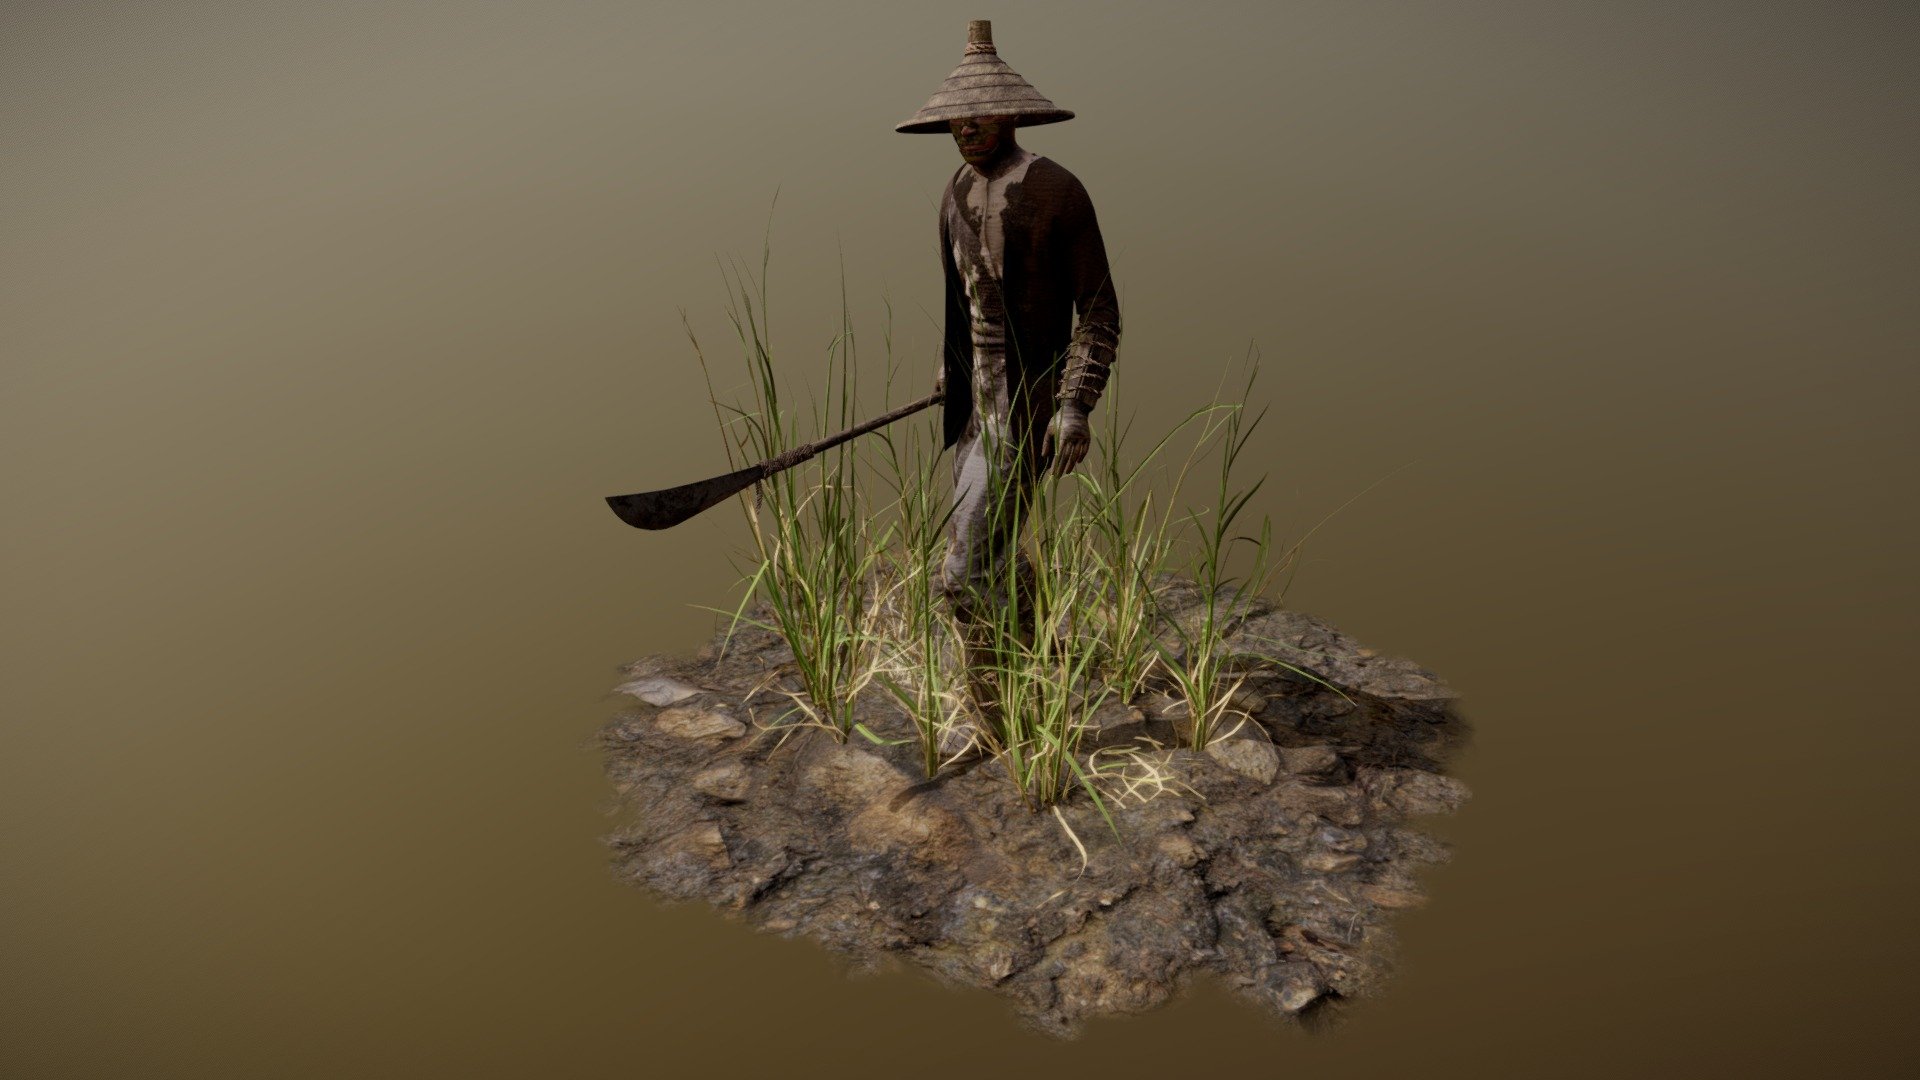 Character concept based of a rice farmer that had to take up arms and defend his land. Look and feel of the design based on Sekiro Shadows Die Twice. This was an exploratory project to go through a Maya-Marvelous Designer-ZBrush work flow. 

Base character and props modeled in Maya, clothing created in Marvelous designer, sculpted detail in Zbrush, tetxured in Substance Painter, rendered using V-Ray, and composite done using Photoshop. Environment props pulled from Megascans.

Character concept created by Dustin Tran (https://www.artstation.com/dustran) 3d model